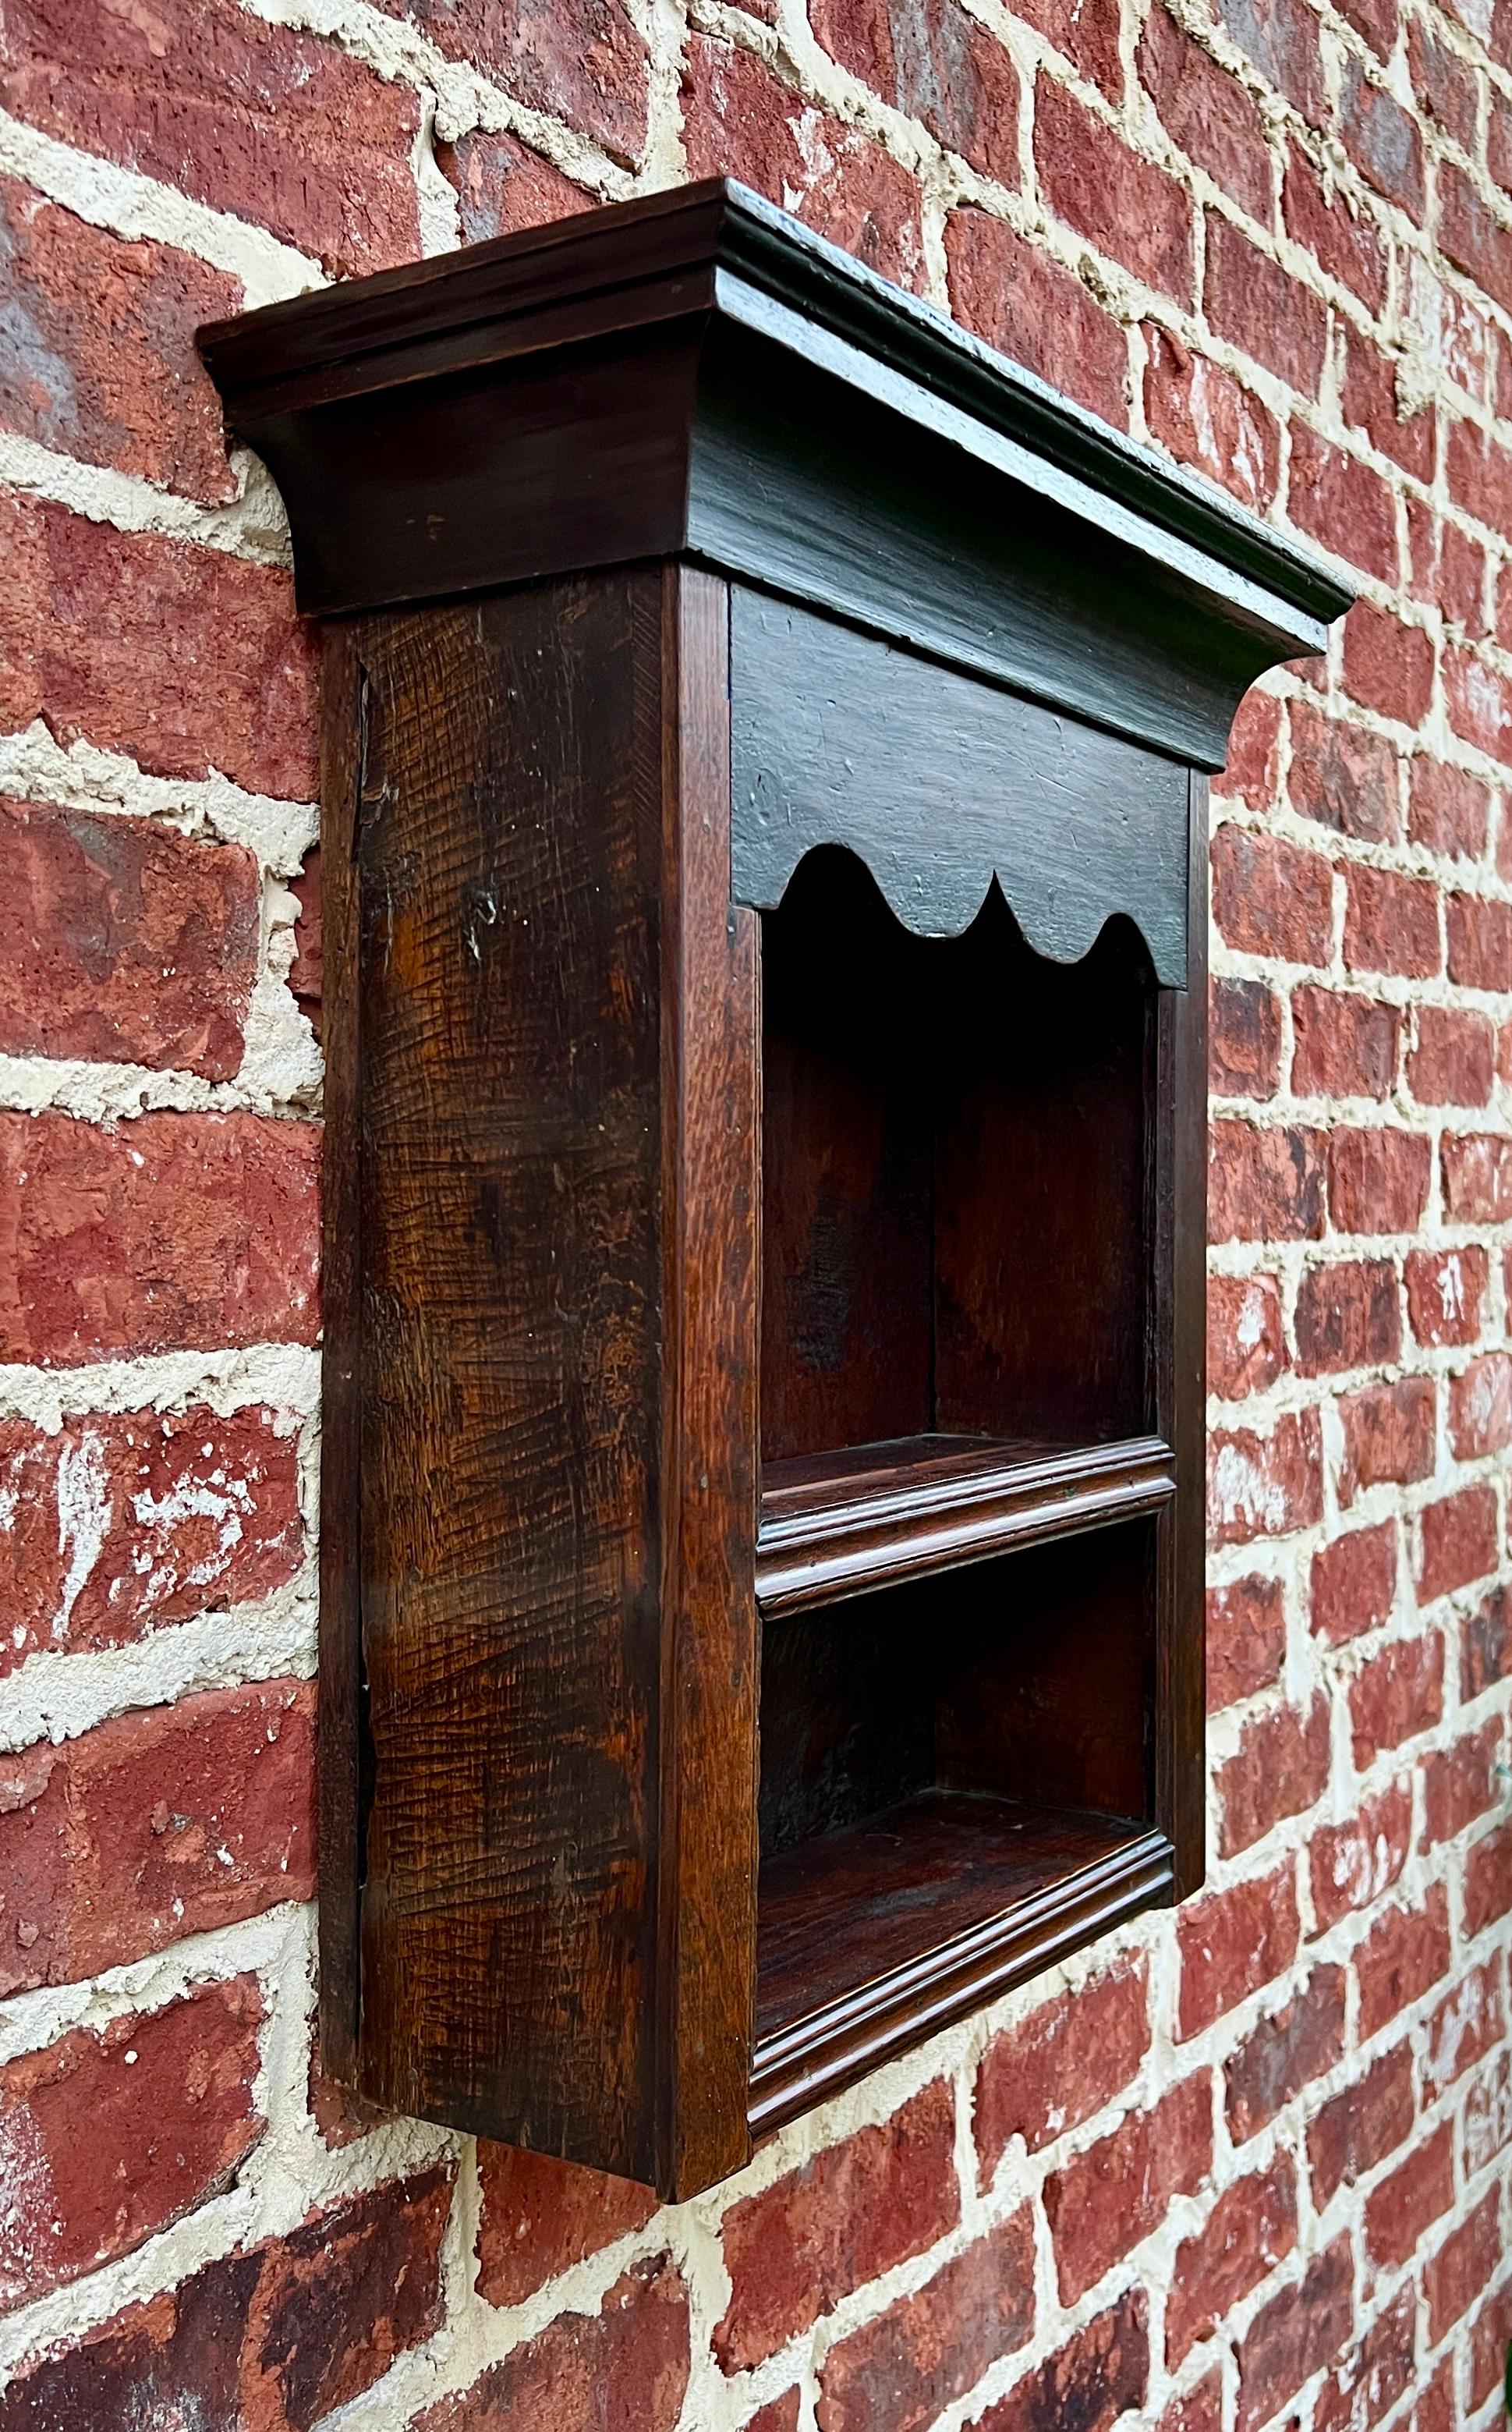 CHARMING Antique English Oak Hanging Wall Shelf Wall Decor Cabinet Small Bookcase~~c. 18th Century

 The perfect decorative accent piece for any home~~brackets on back for hanging 

 22